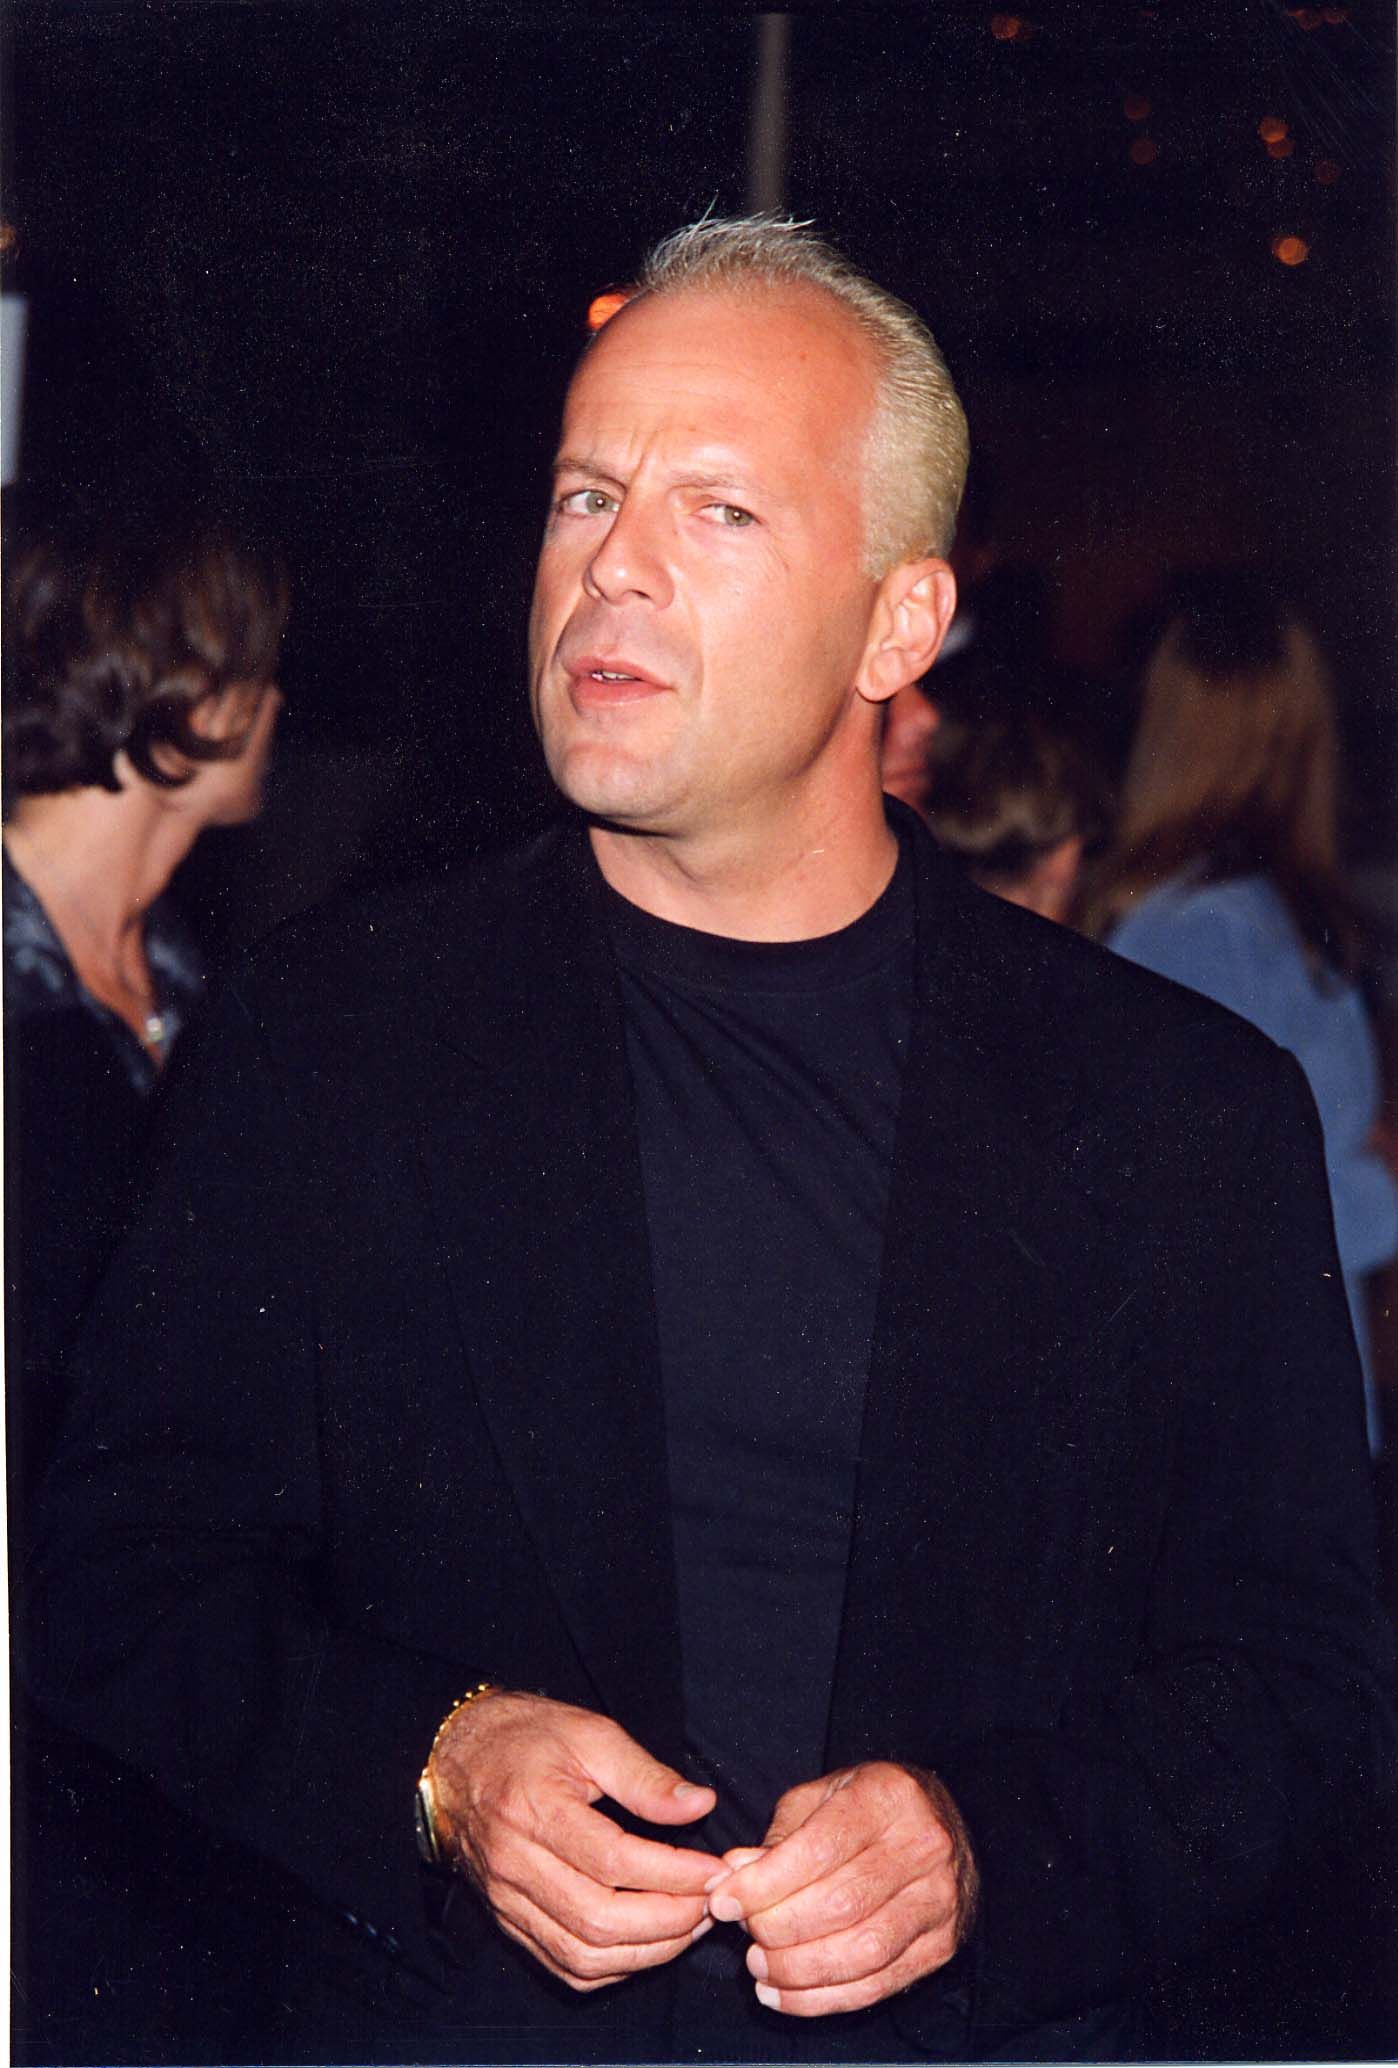 Bruce Willis showed signs of cognitive decline on set crew members say